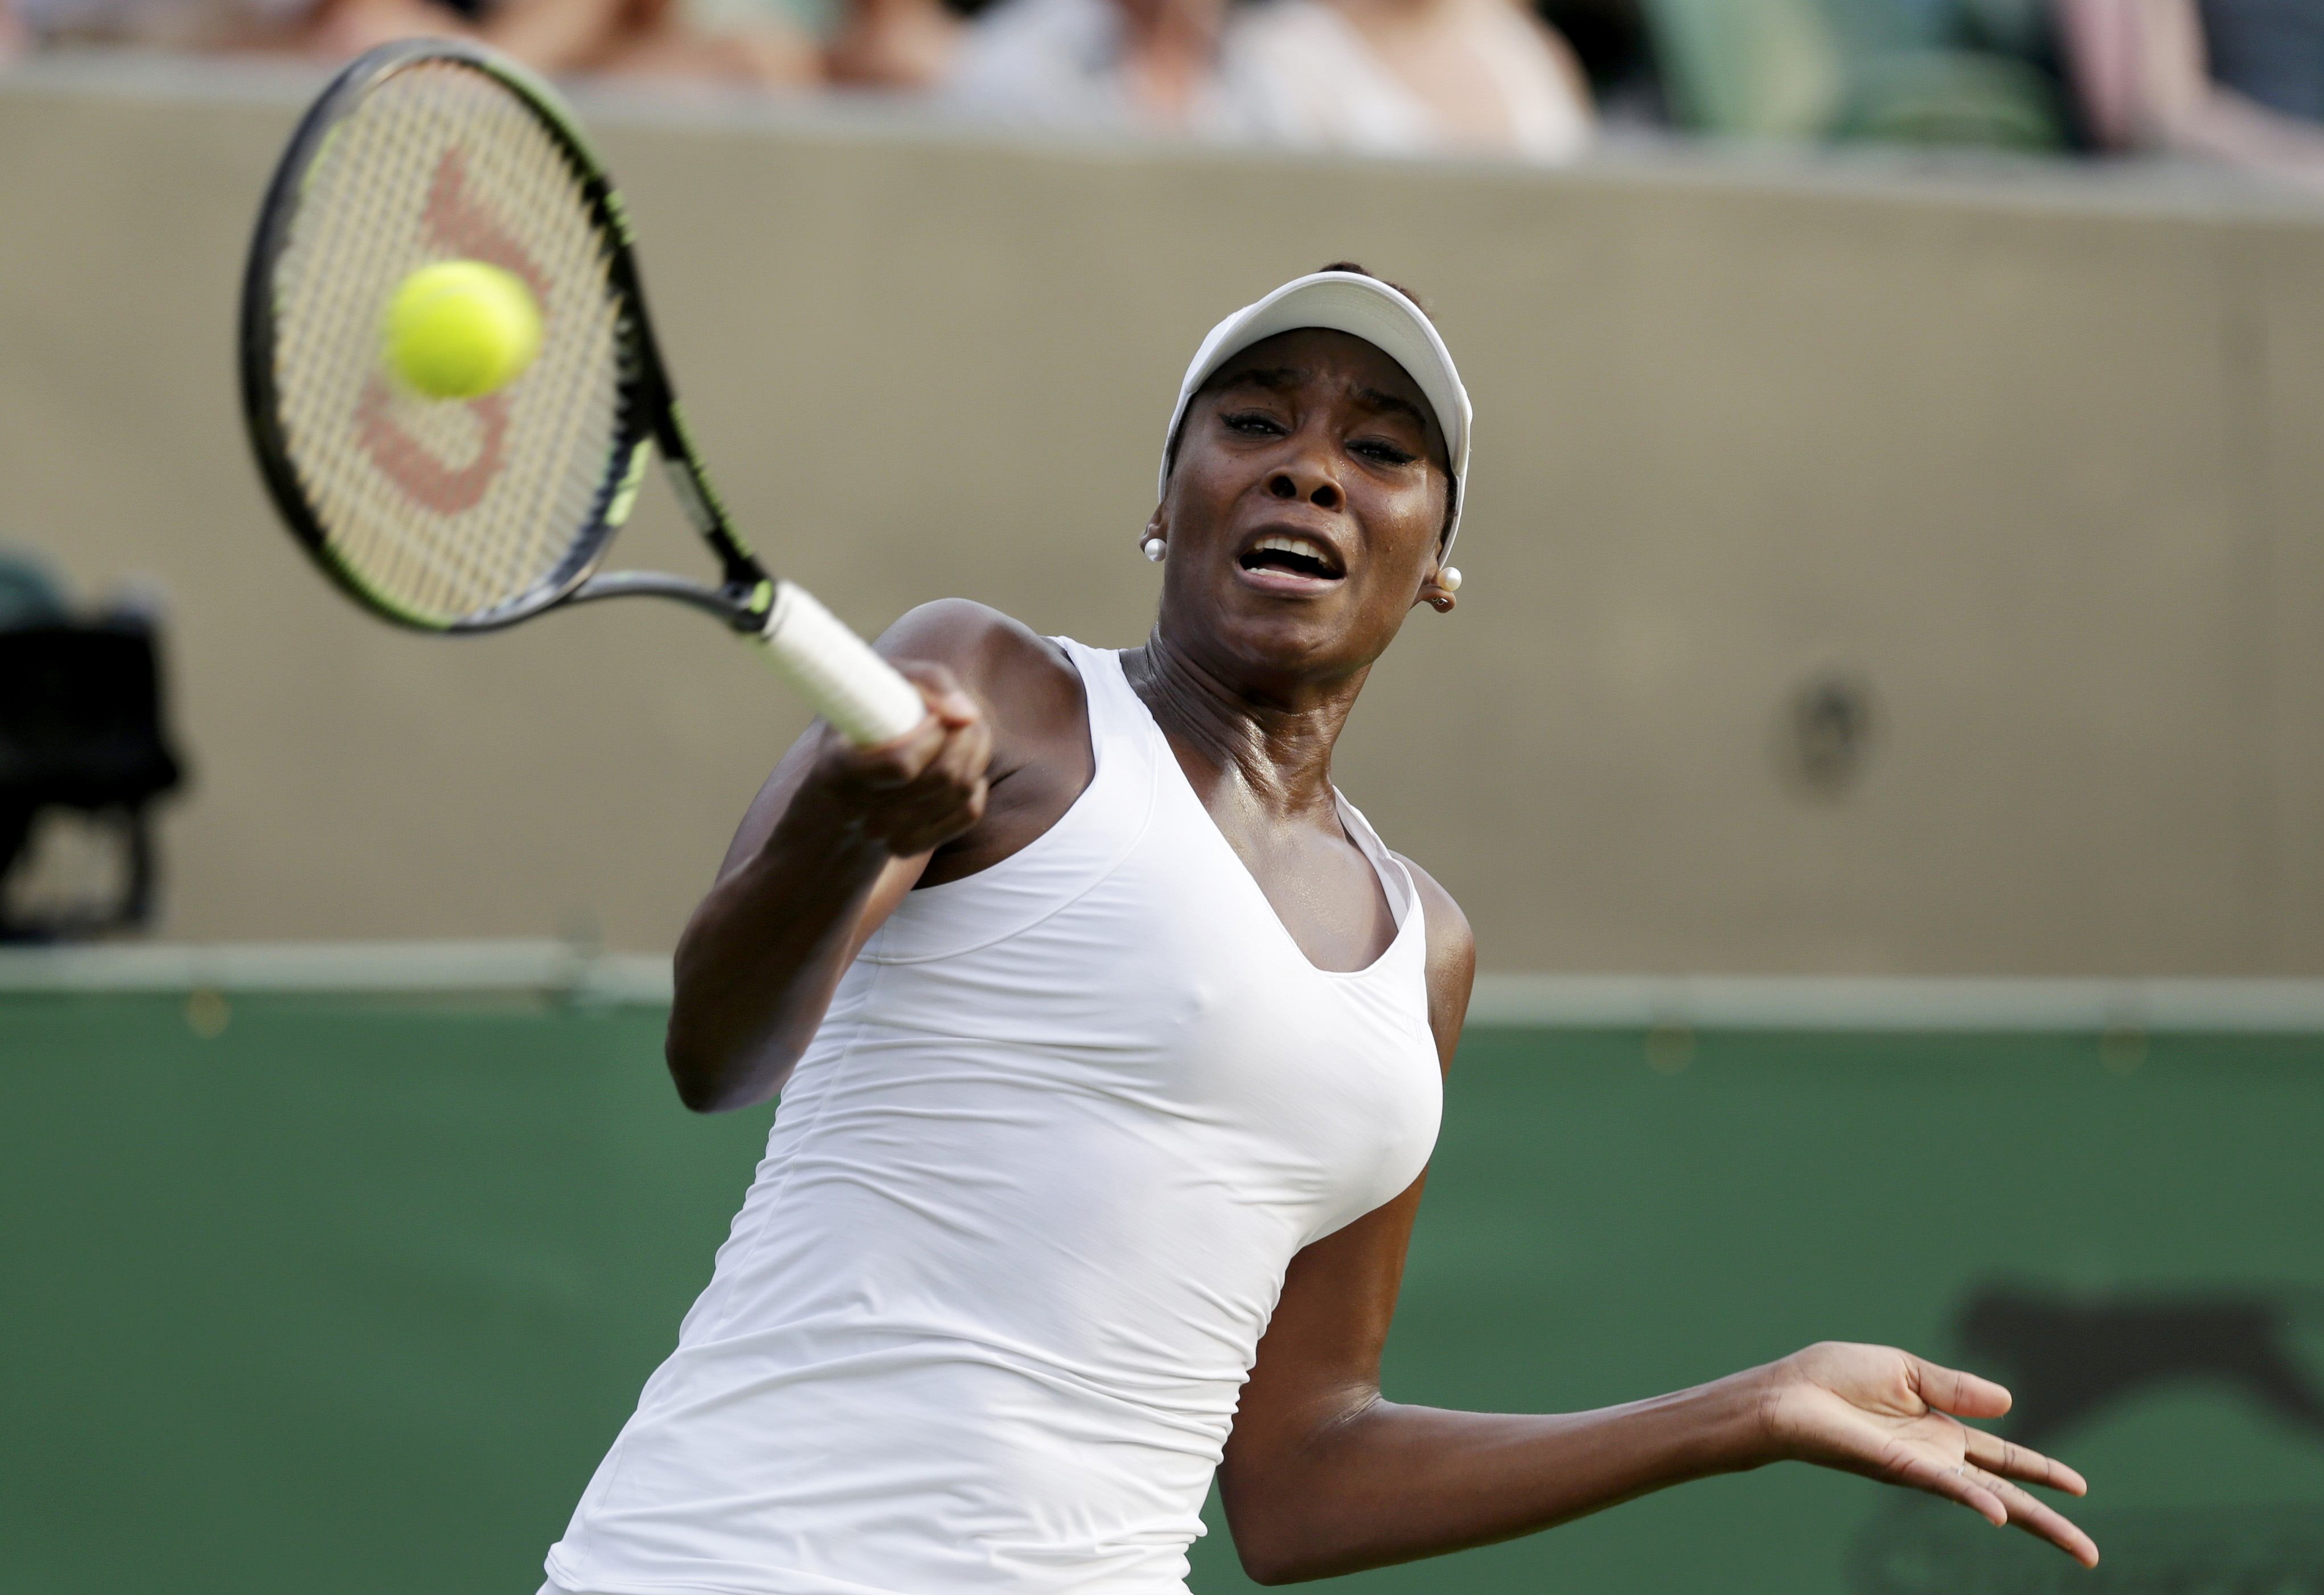 Venus Williams of the U.S.A. hits a shot during her match against Yulia Putintseva of Kazakhstan at the Wimbledon Tennis Championships in London, July 1, 2015. REUTERS/Henry Browne